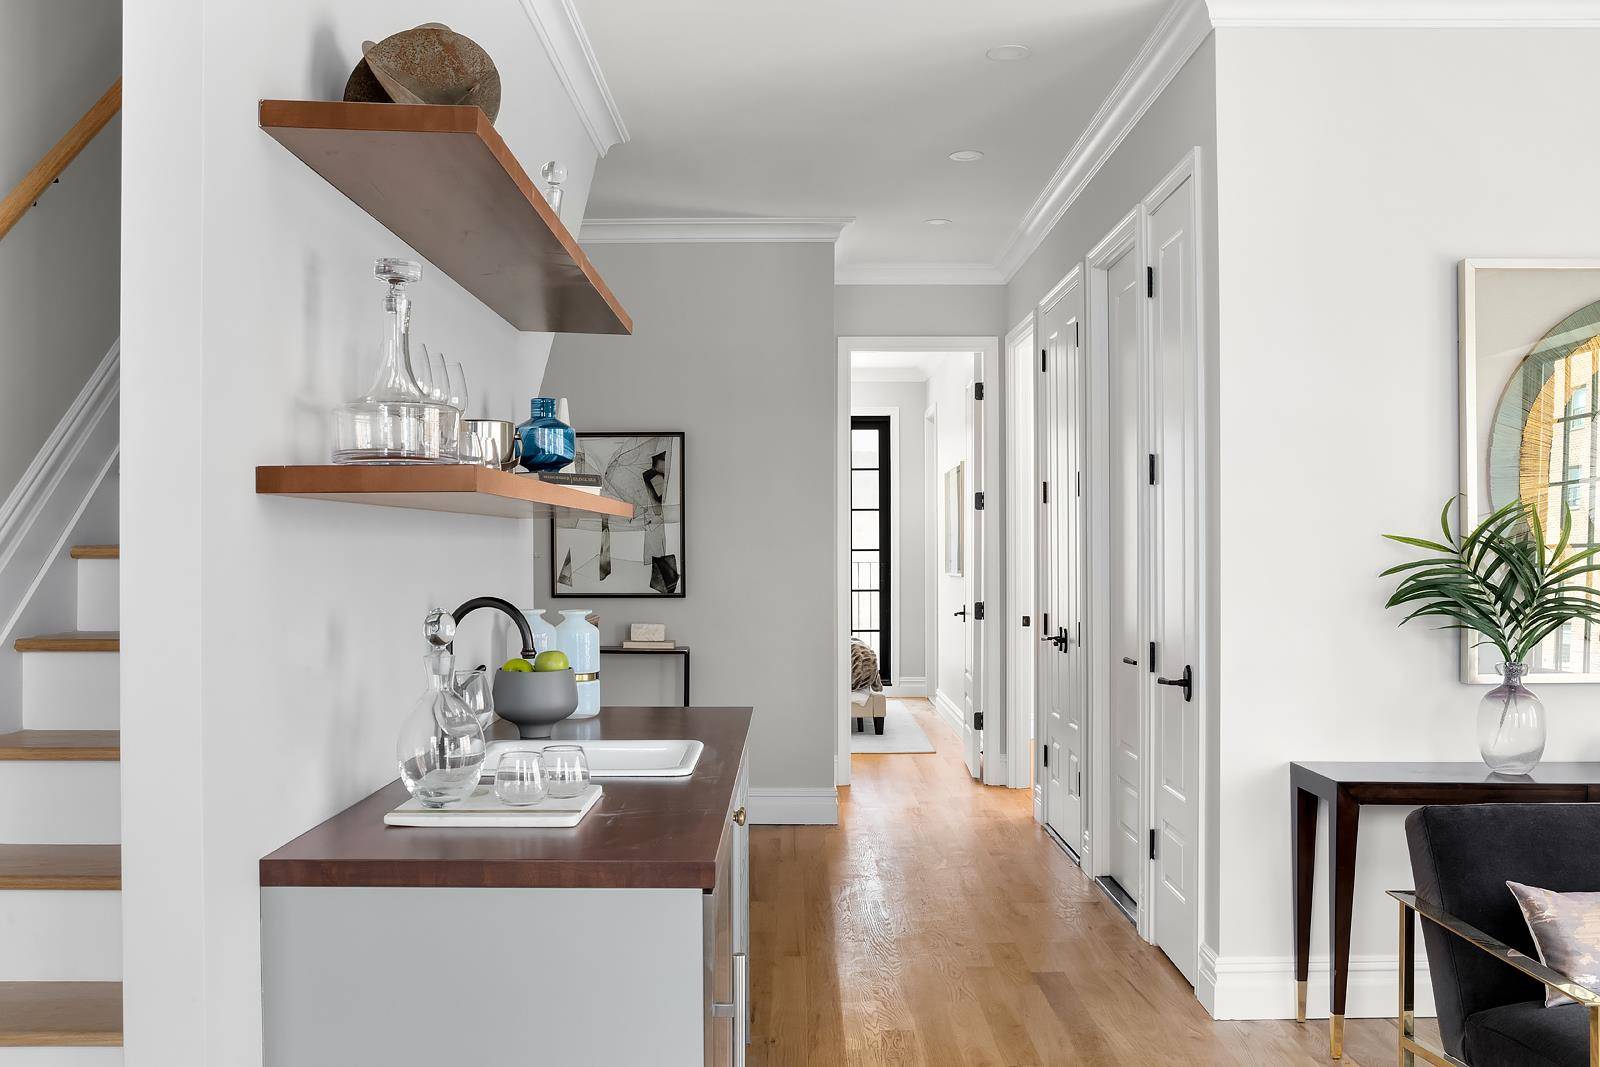 Located on a sunny corner in the heart of coveted Boerum Hill, 118 Douglass Street is an impeccable new condominium offering townhouse style homes each with private garage parking.